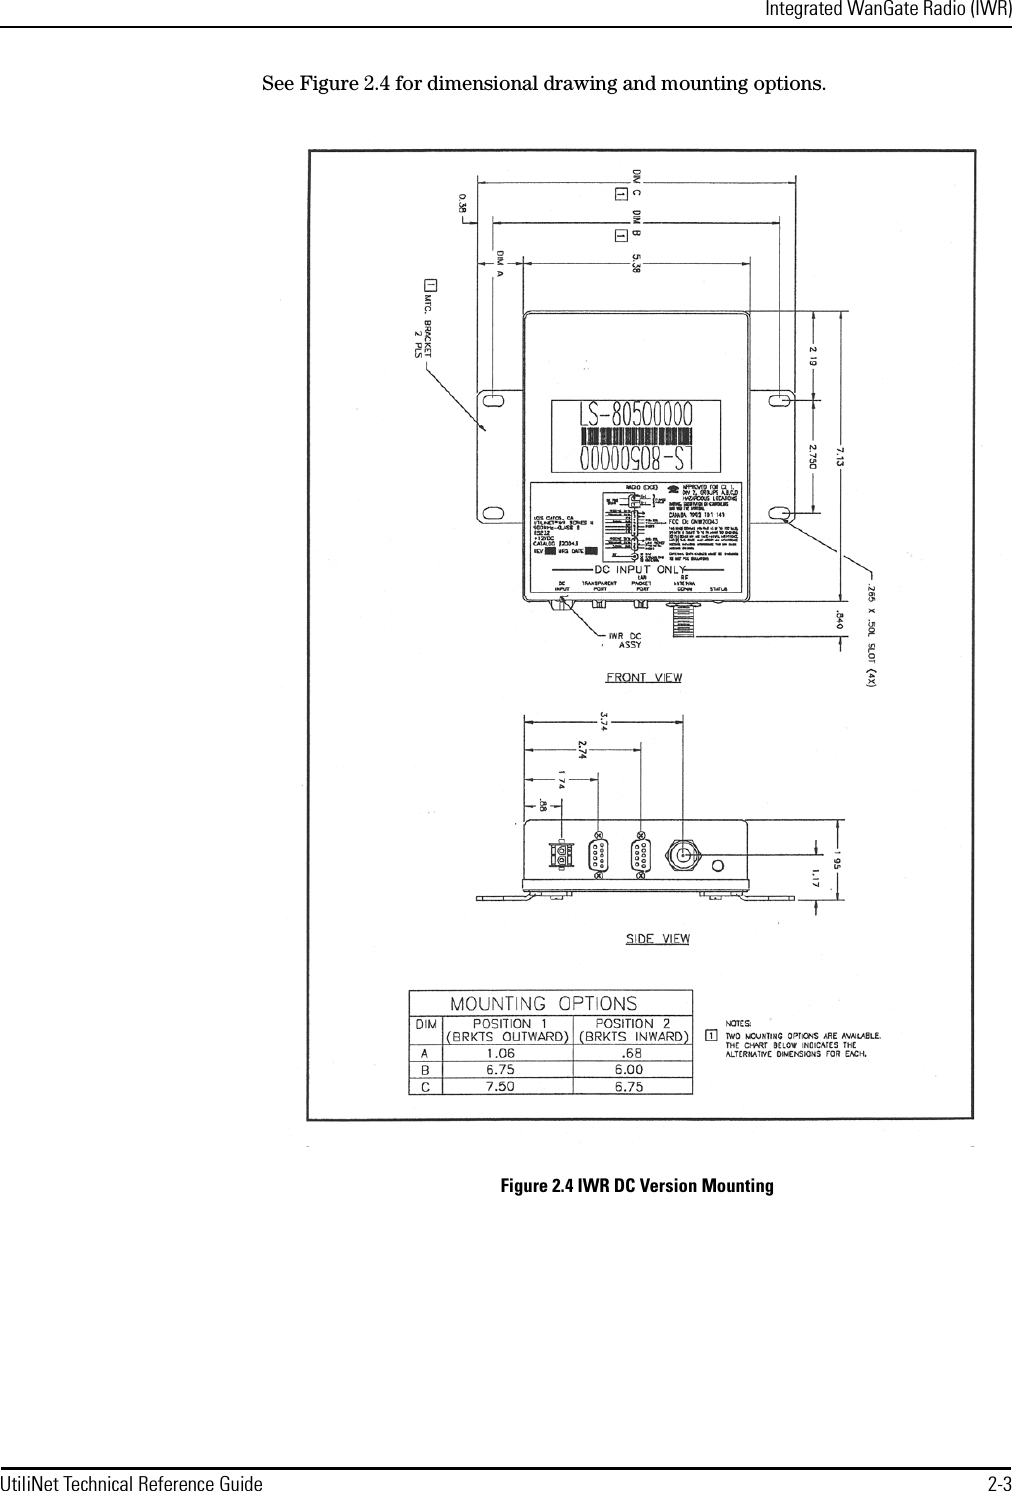 Integrated WanGate Radio (IWR)UtiliNet Technical Reference Guide 2-3See Figure 2.4 for dimensional drawing and mounting options.Figure 2.4 IWR DC Version Mounting